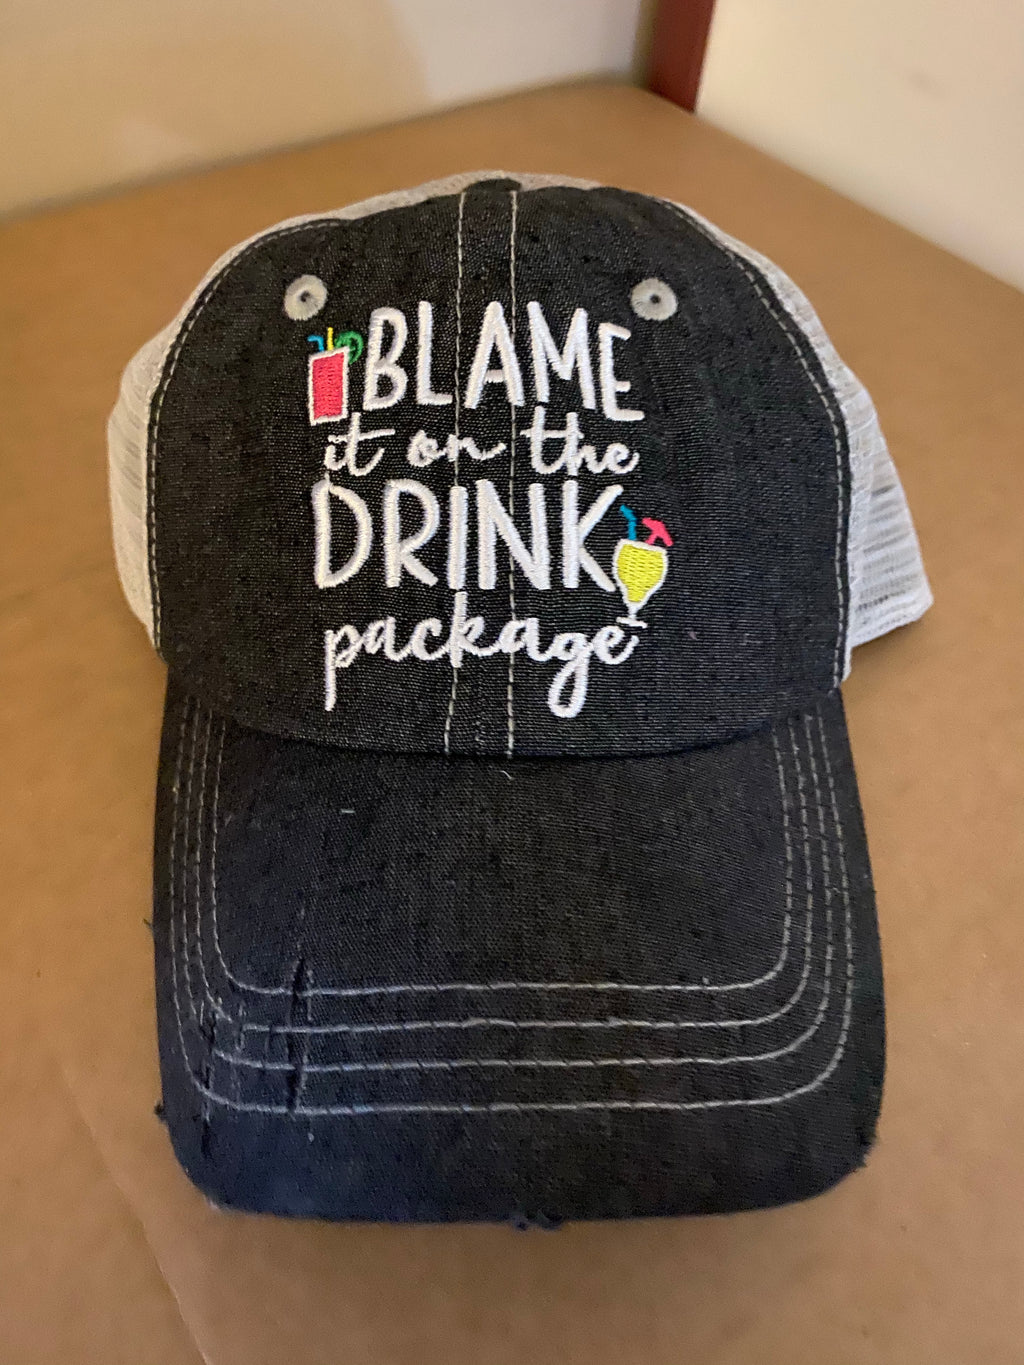 Blame It On The Drink Package Cruise Hat Distressed Trucker Hat -364